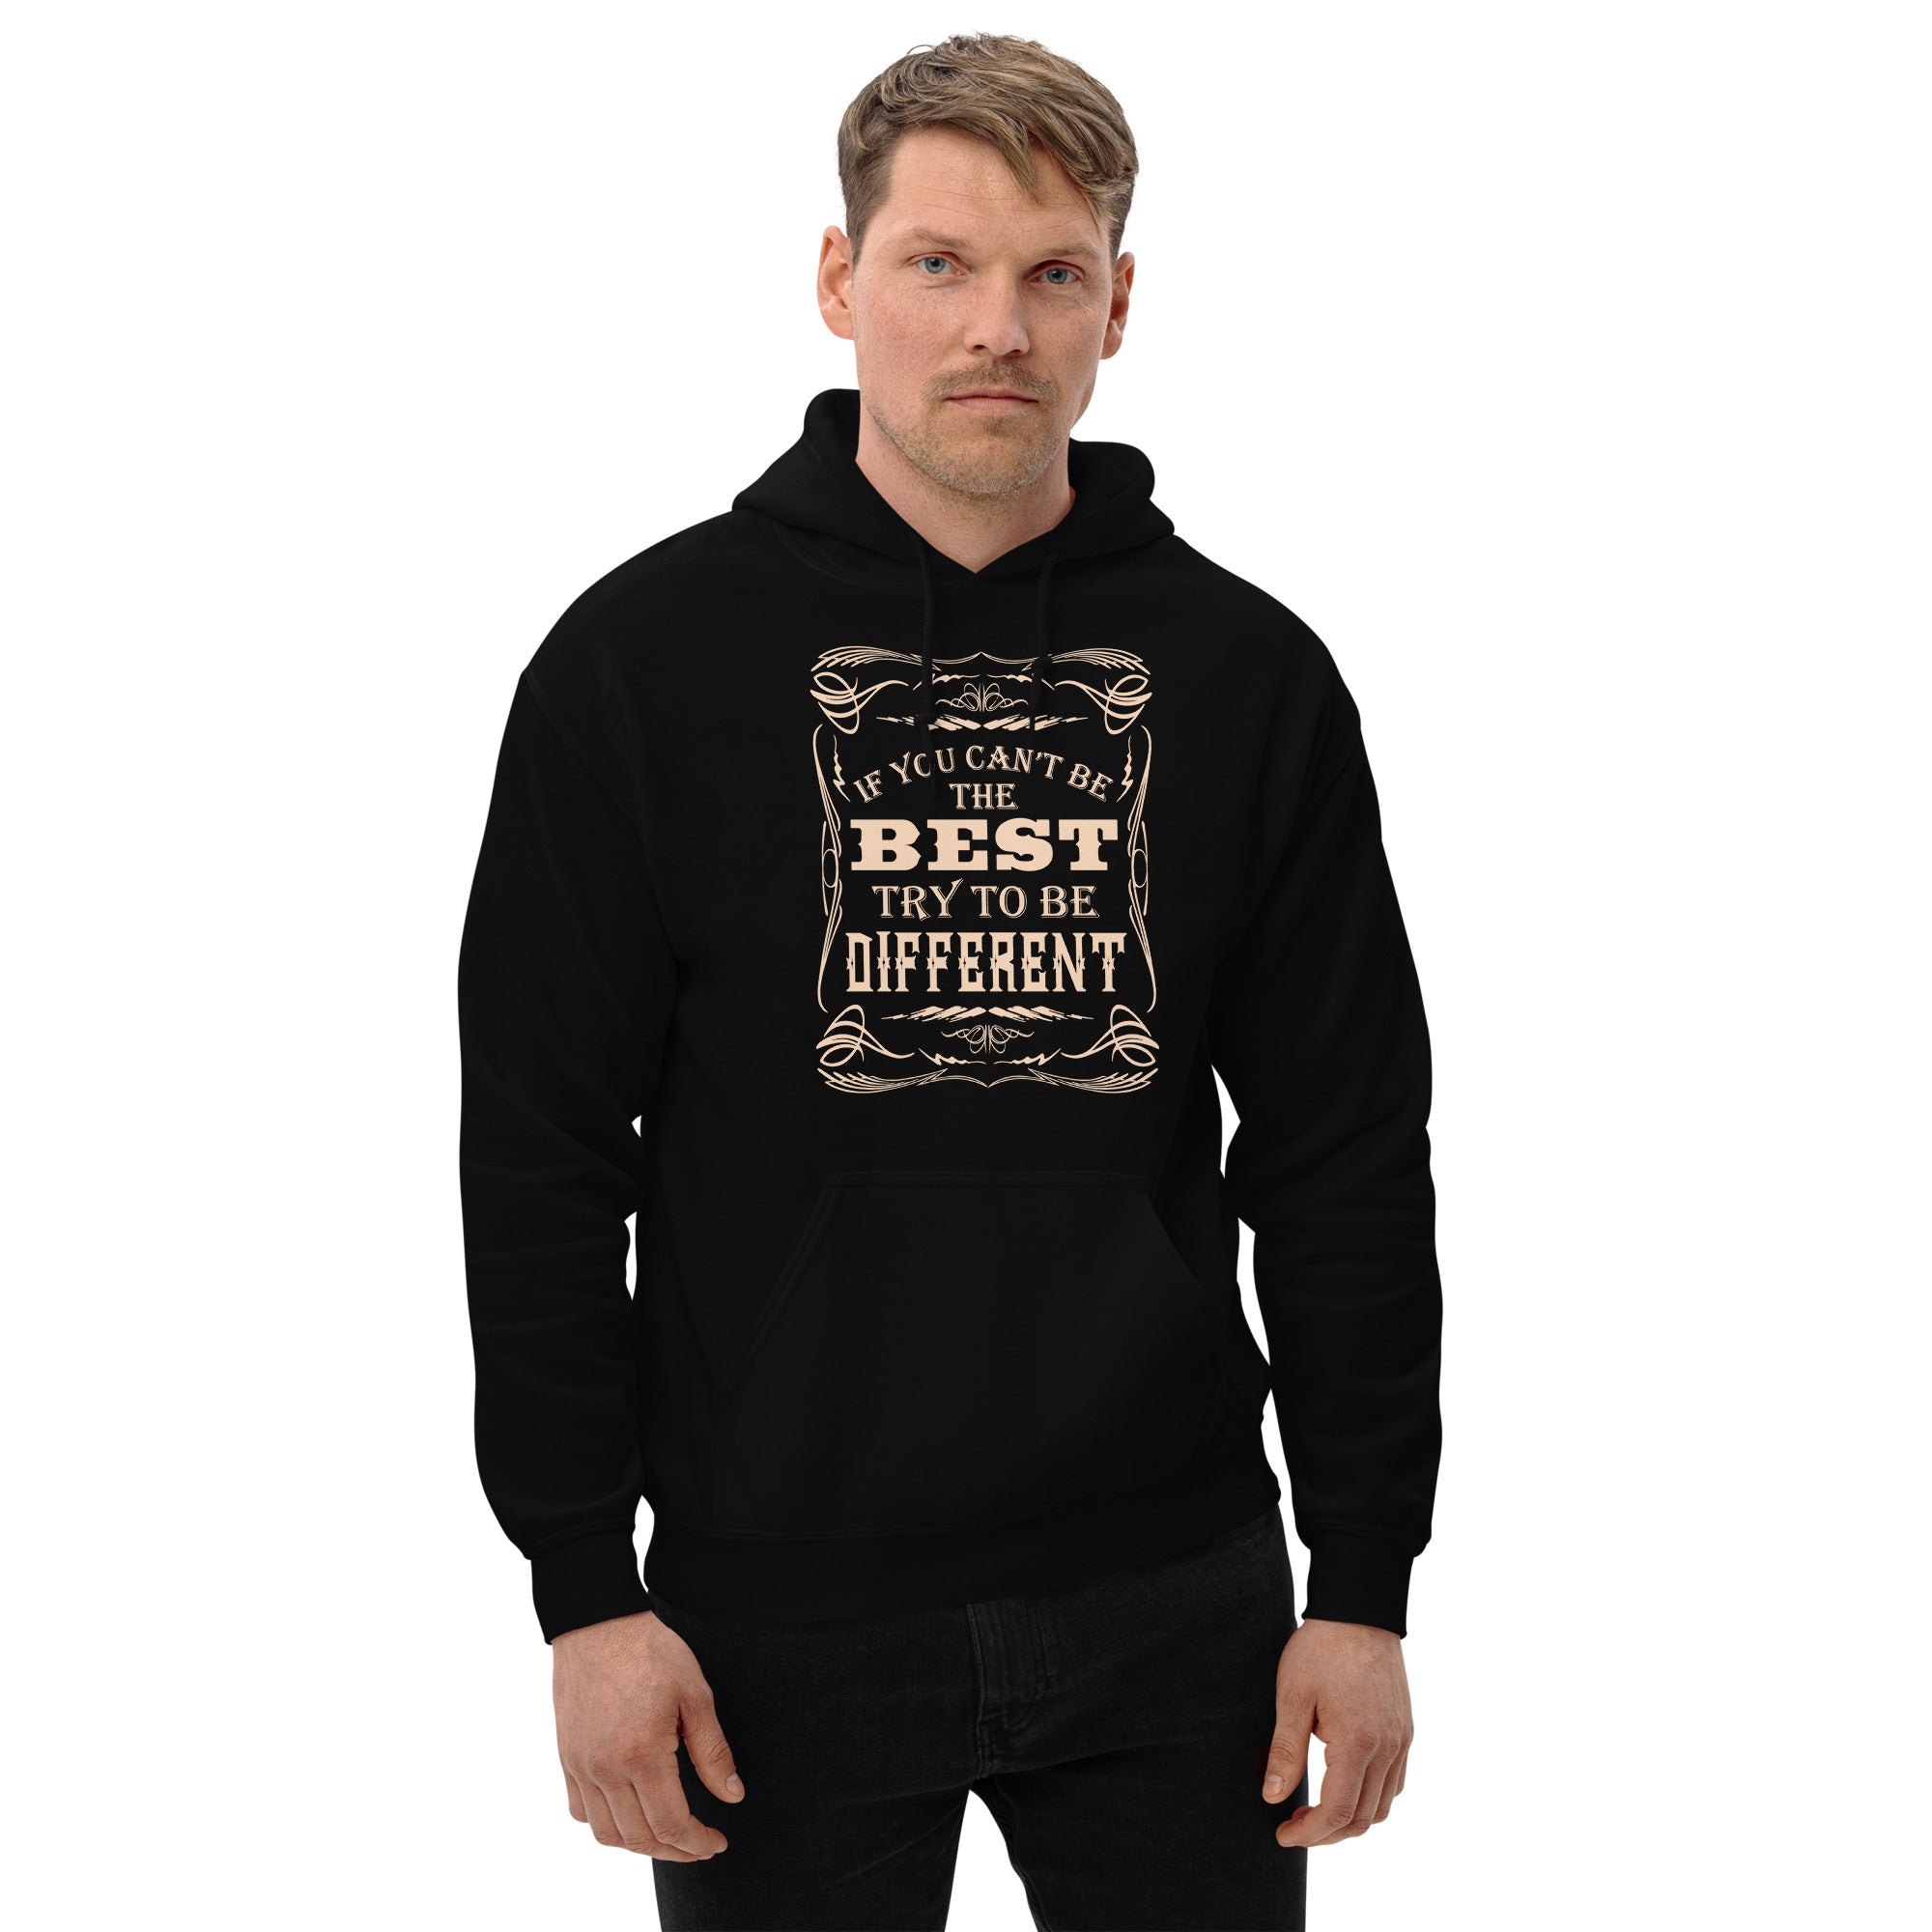 If You Can't Be The Best, Try To Be Different - Unisex Hoodie